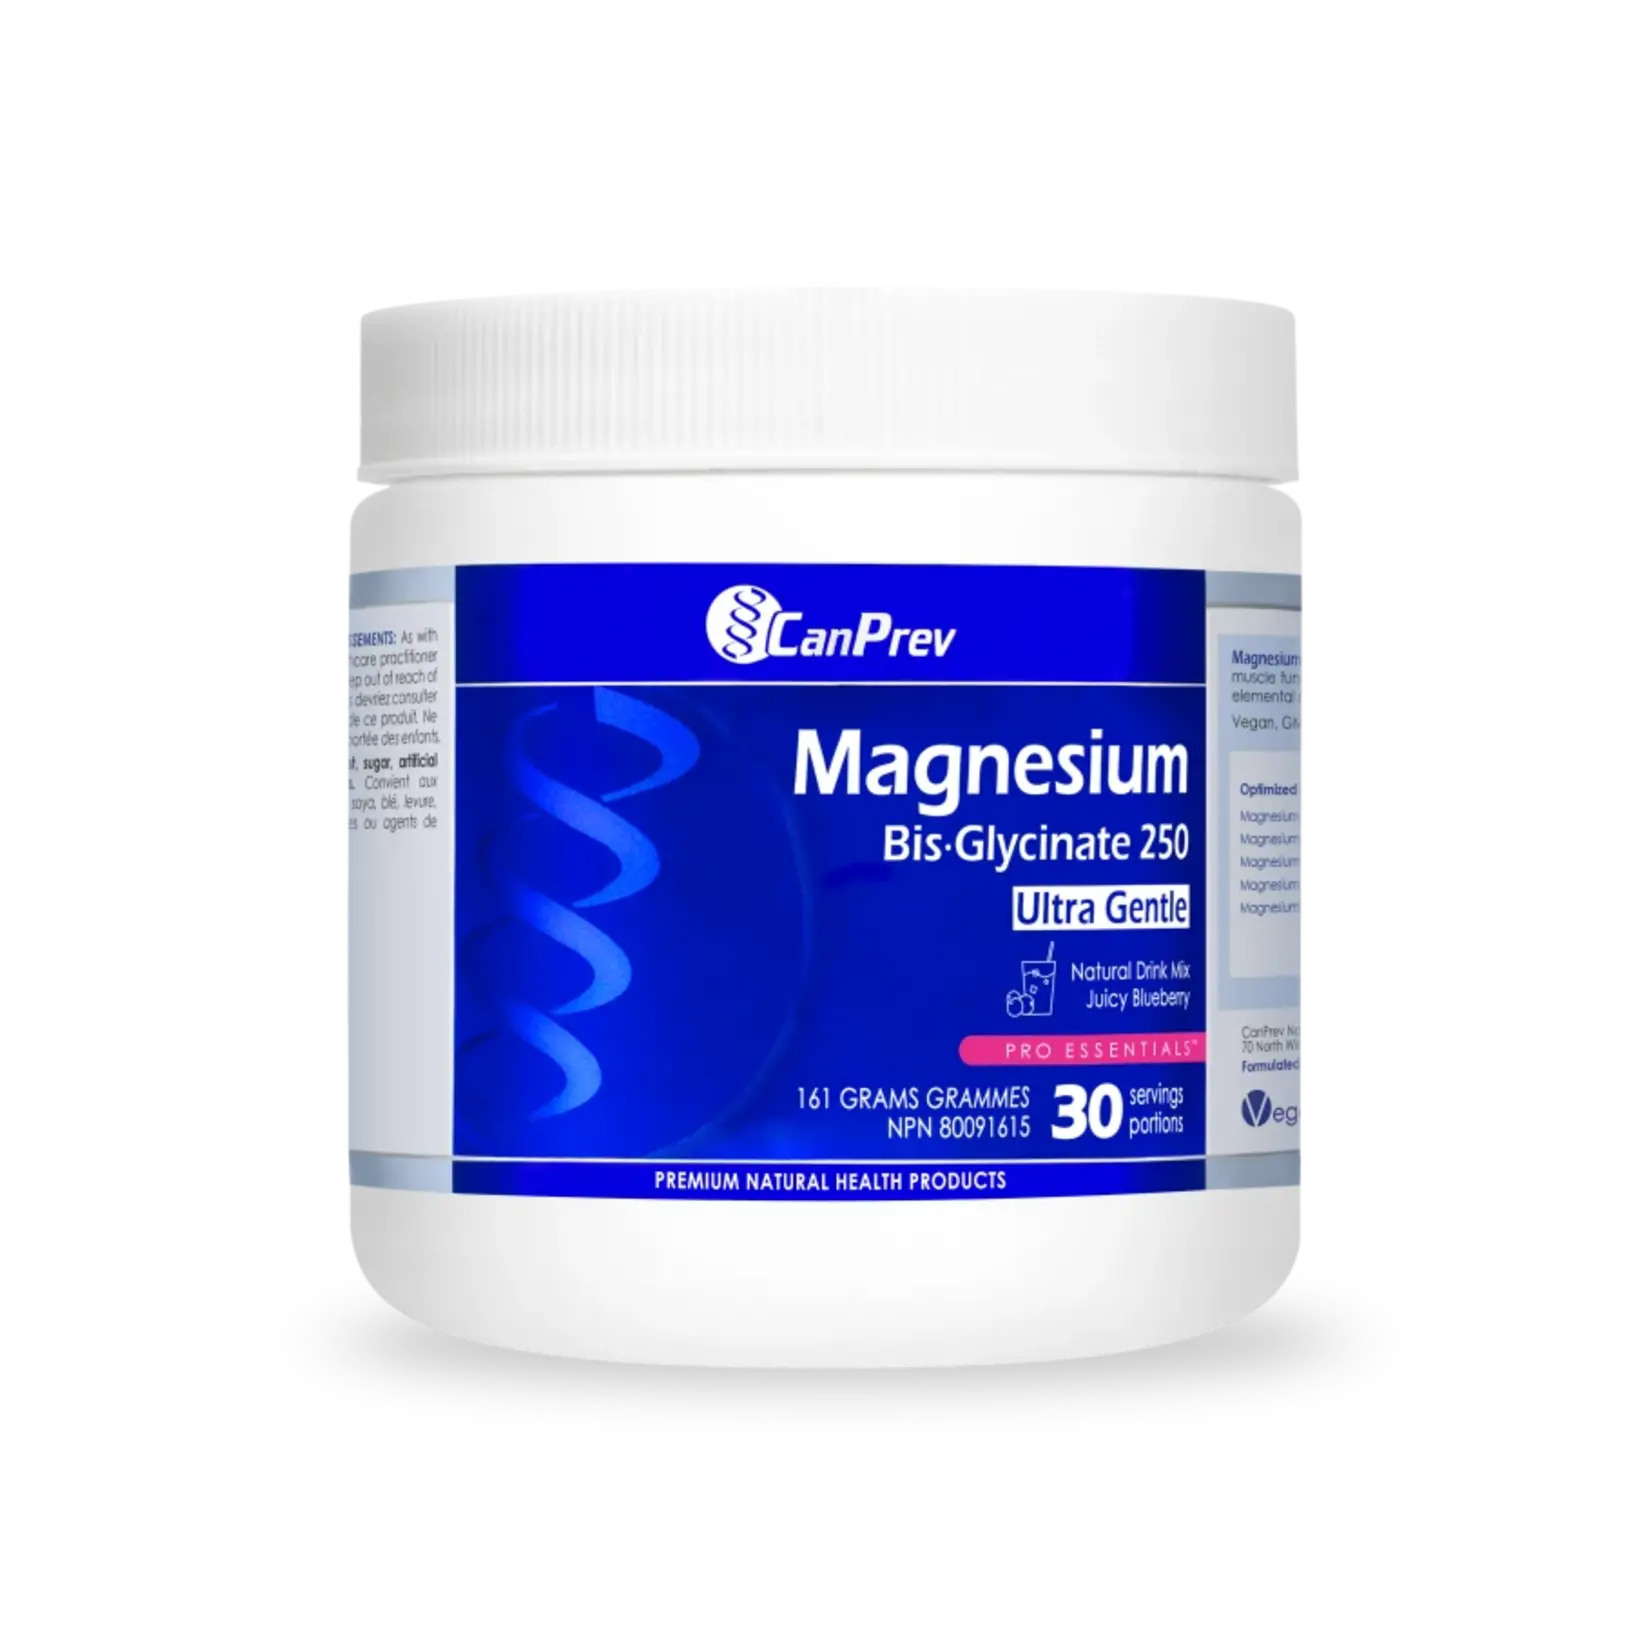 CANPREV CANPREV MAGNESIUM BIS-GLYCINATE DRINK MIX - JUICY BLUEBERRY 161G